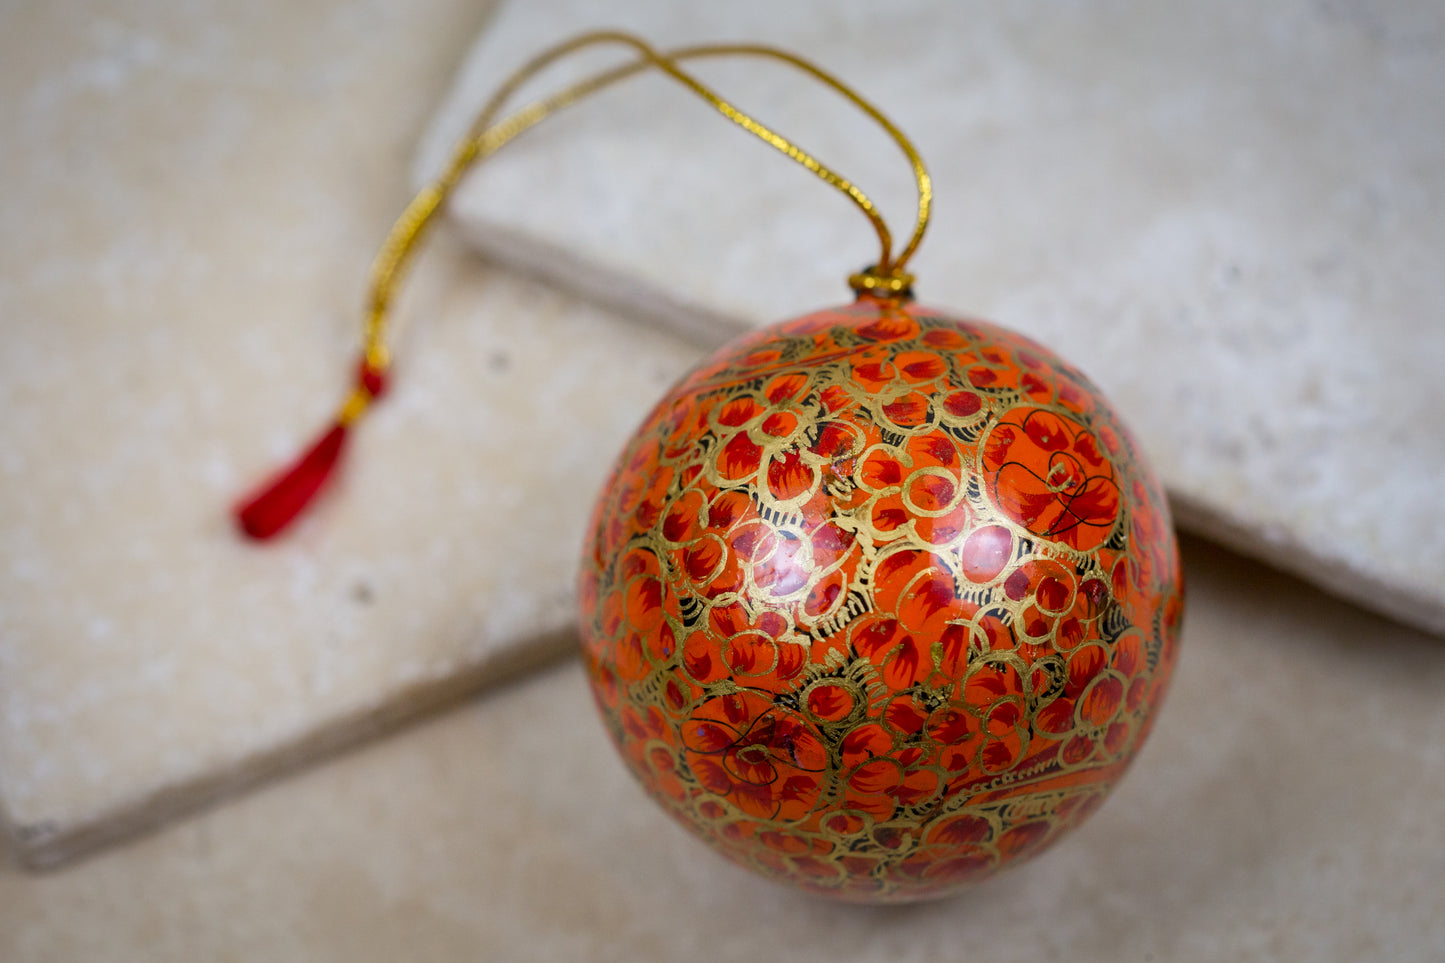 Handmade and hand painted decorative ornament orange red gold